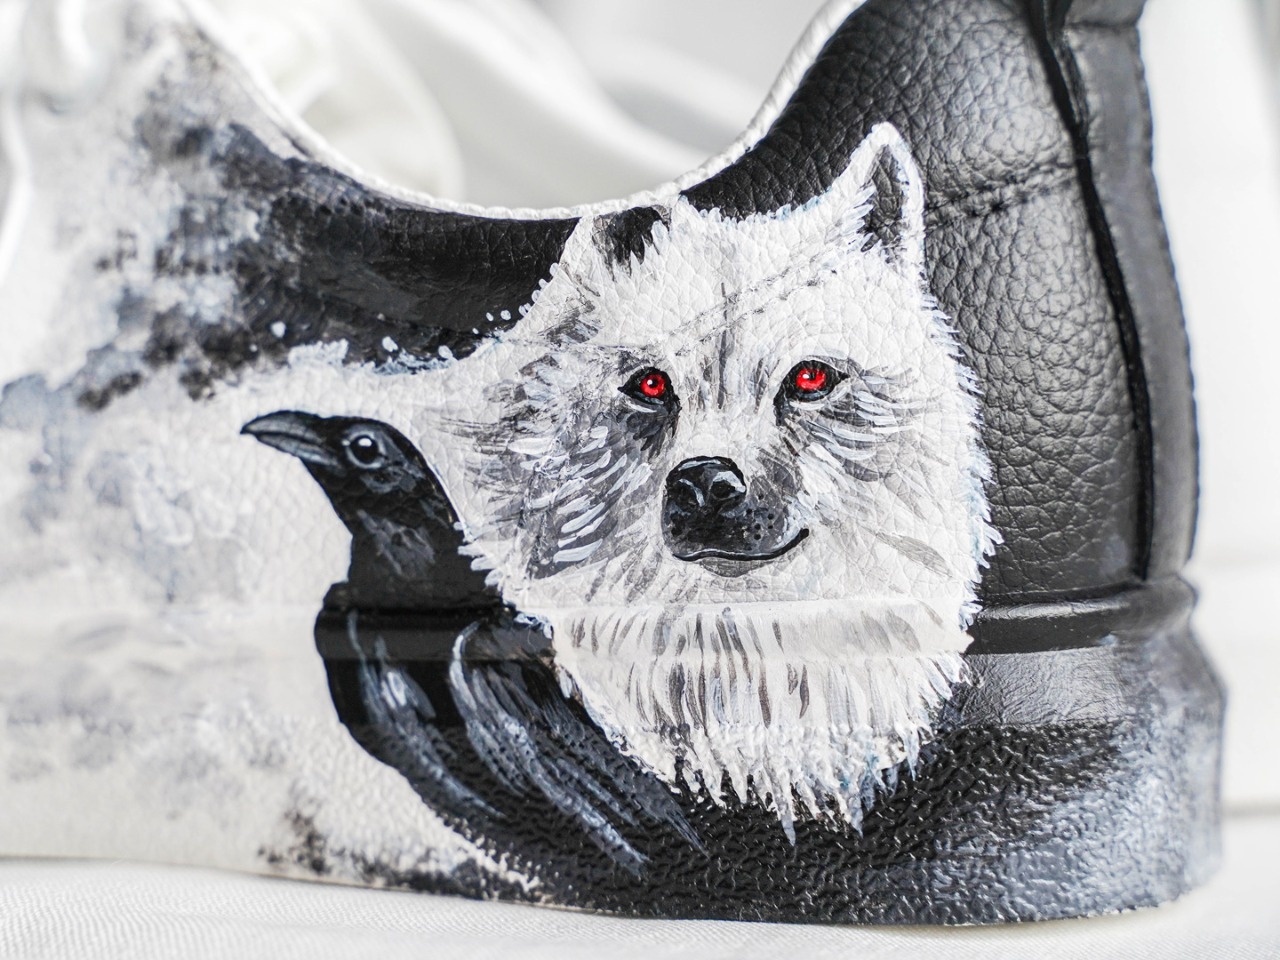 The Ghost and the Three-Eyed Raven - Painting, Customization, Game of Thrones, Three-eyed raven, Direwolf, Shoe painting, Longpost, Needlework without process